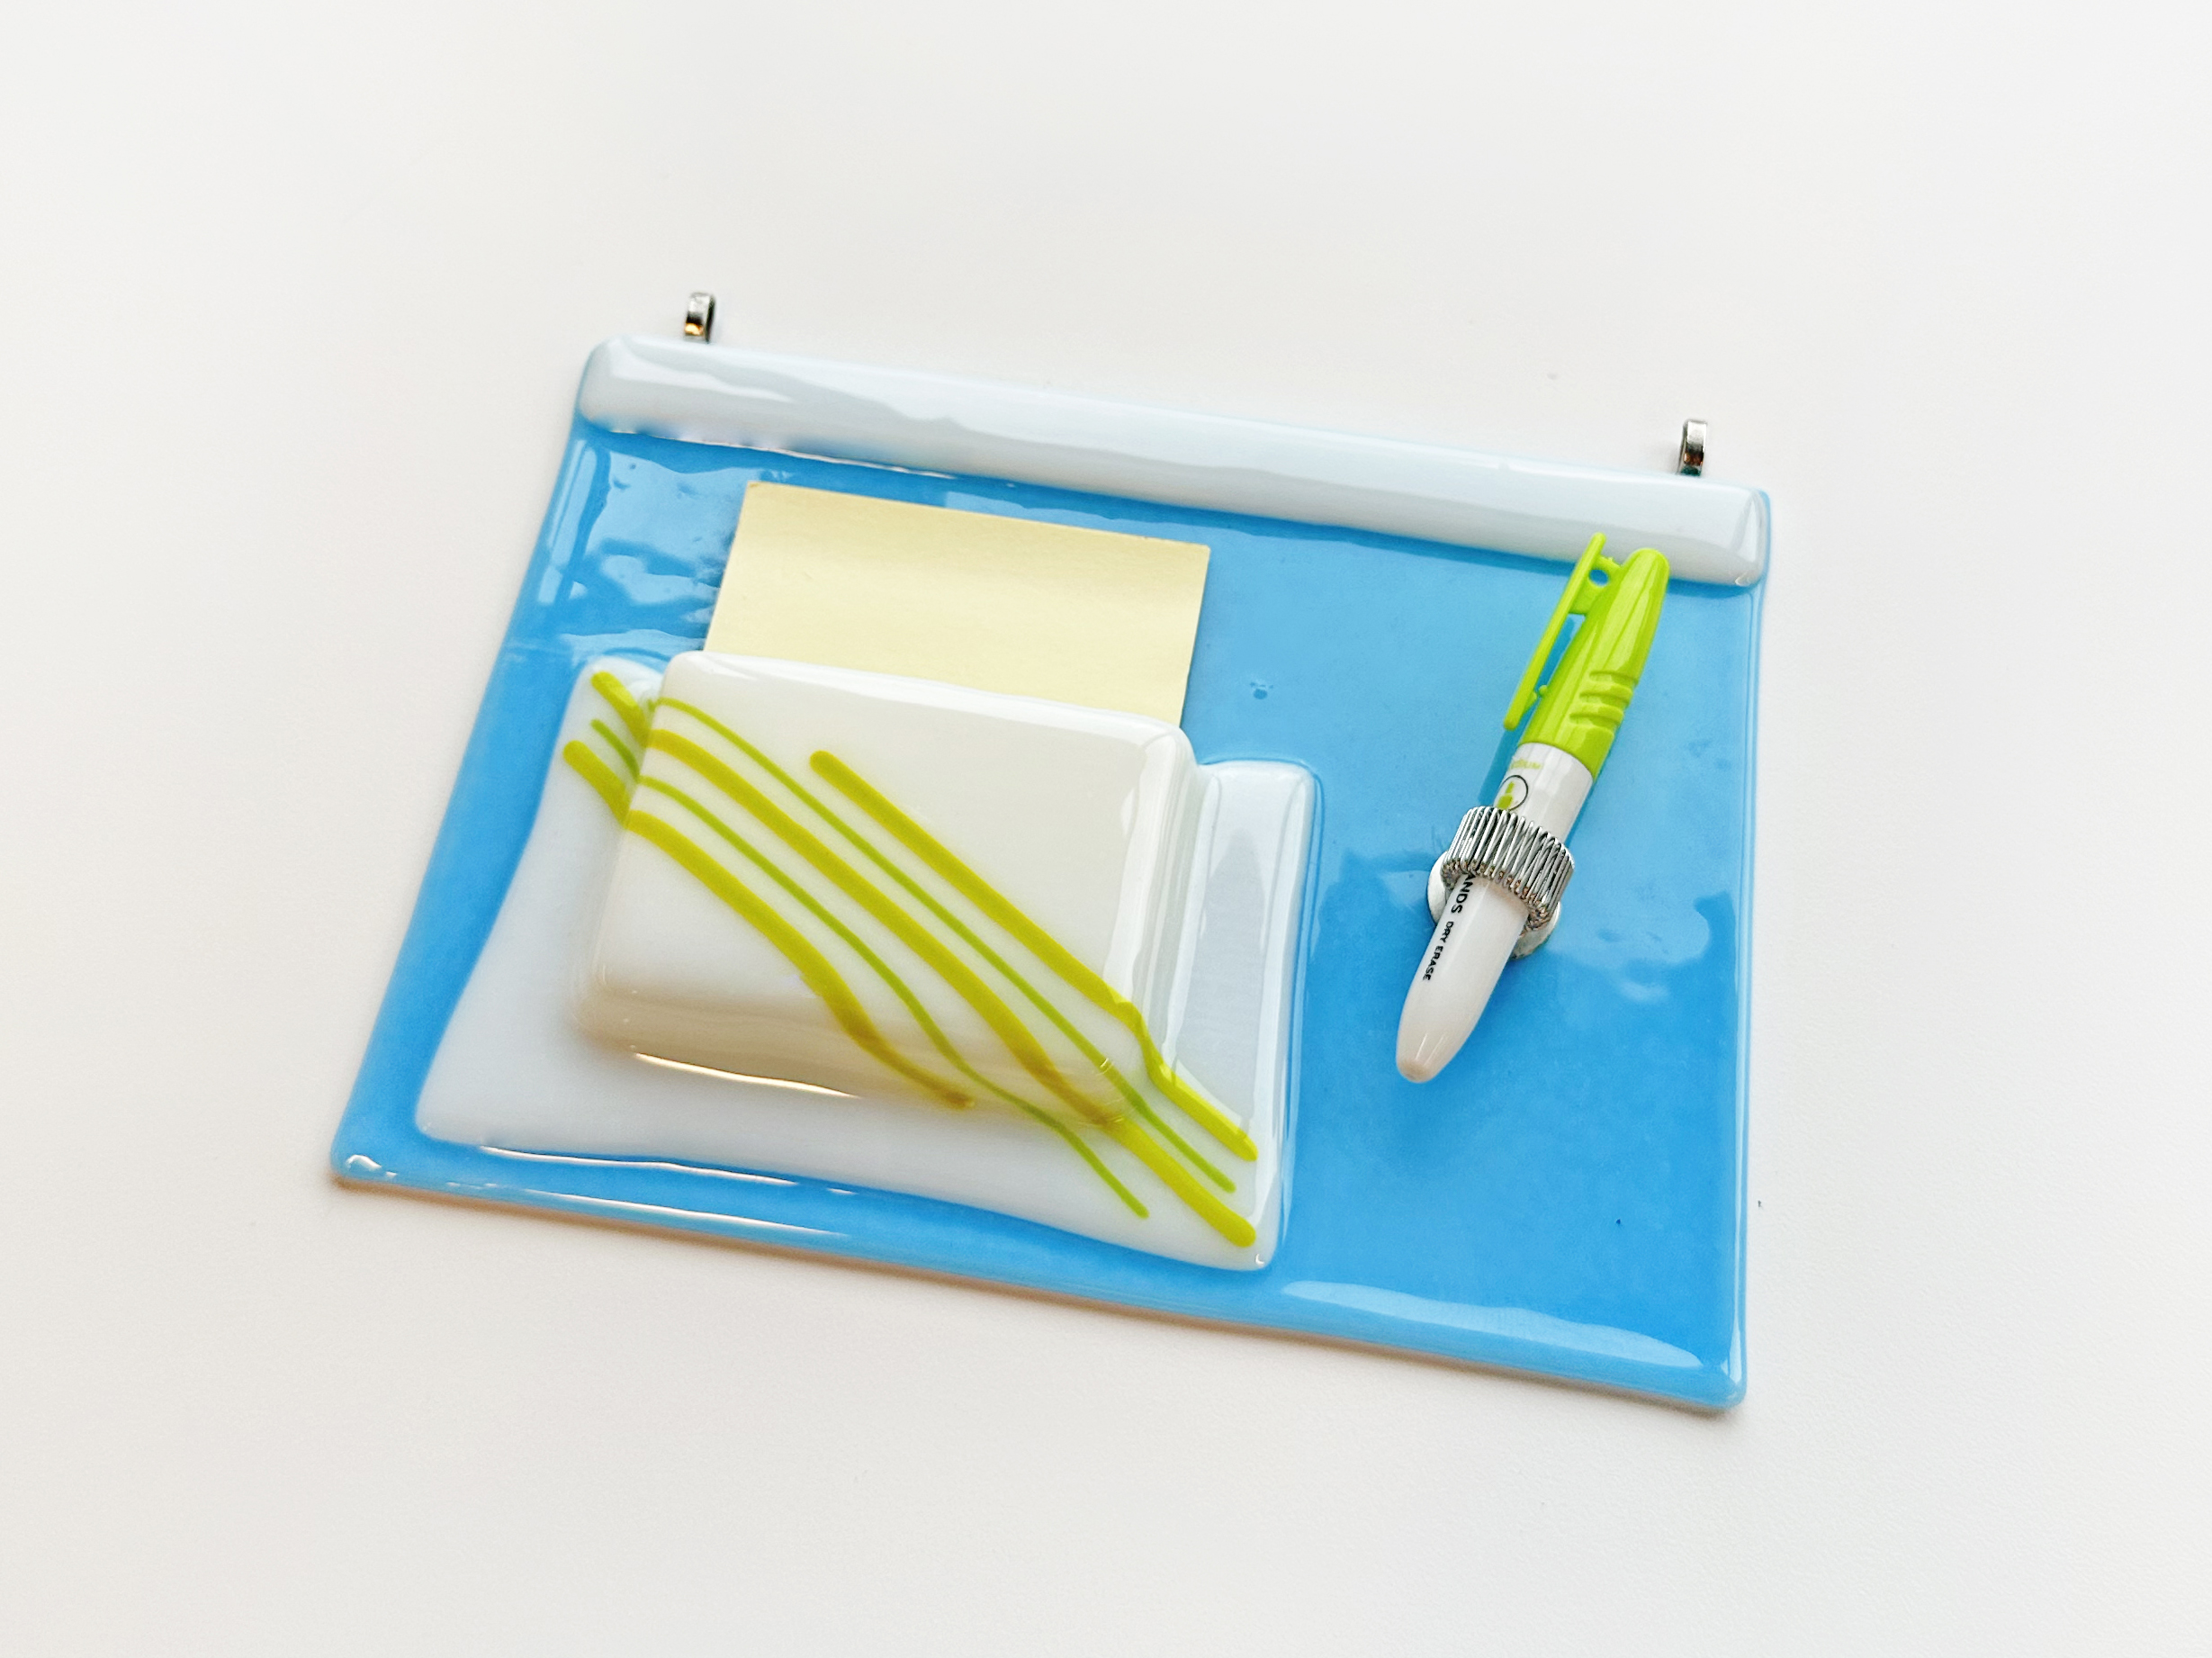 Photo of a fused glass wall hanging that resembles a tabletop with a folder for post it notes and a silver loop for a green sharpie pen.